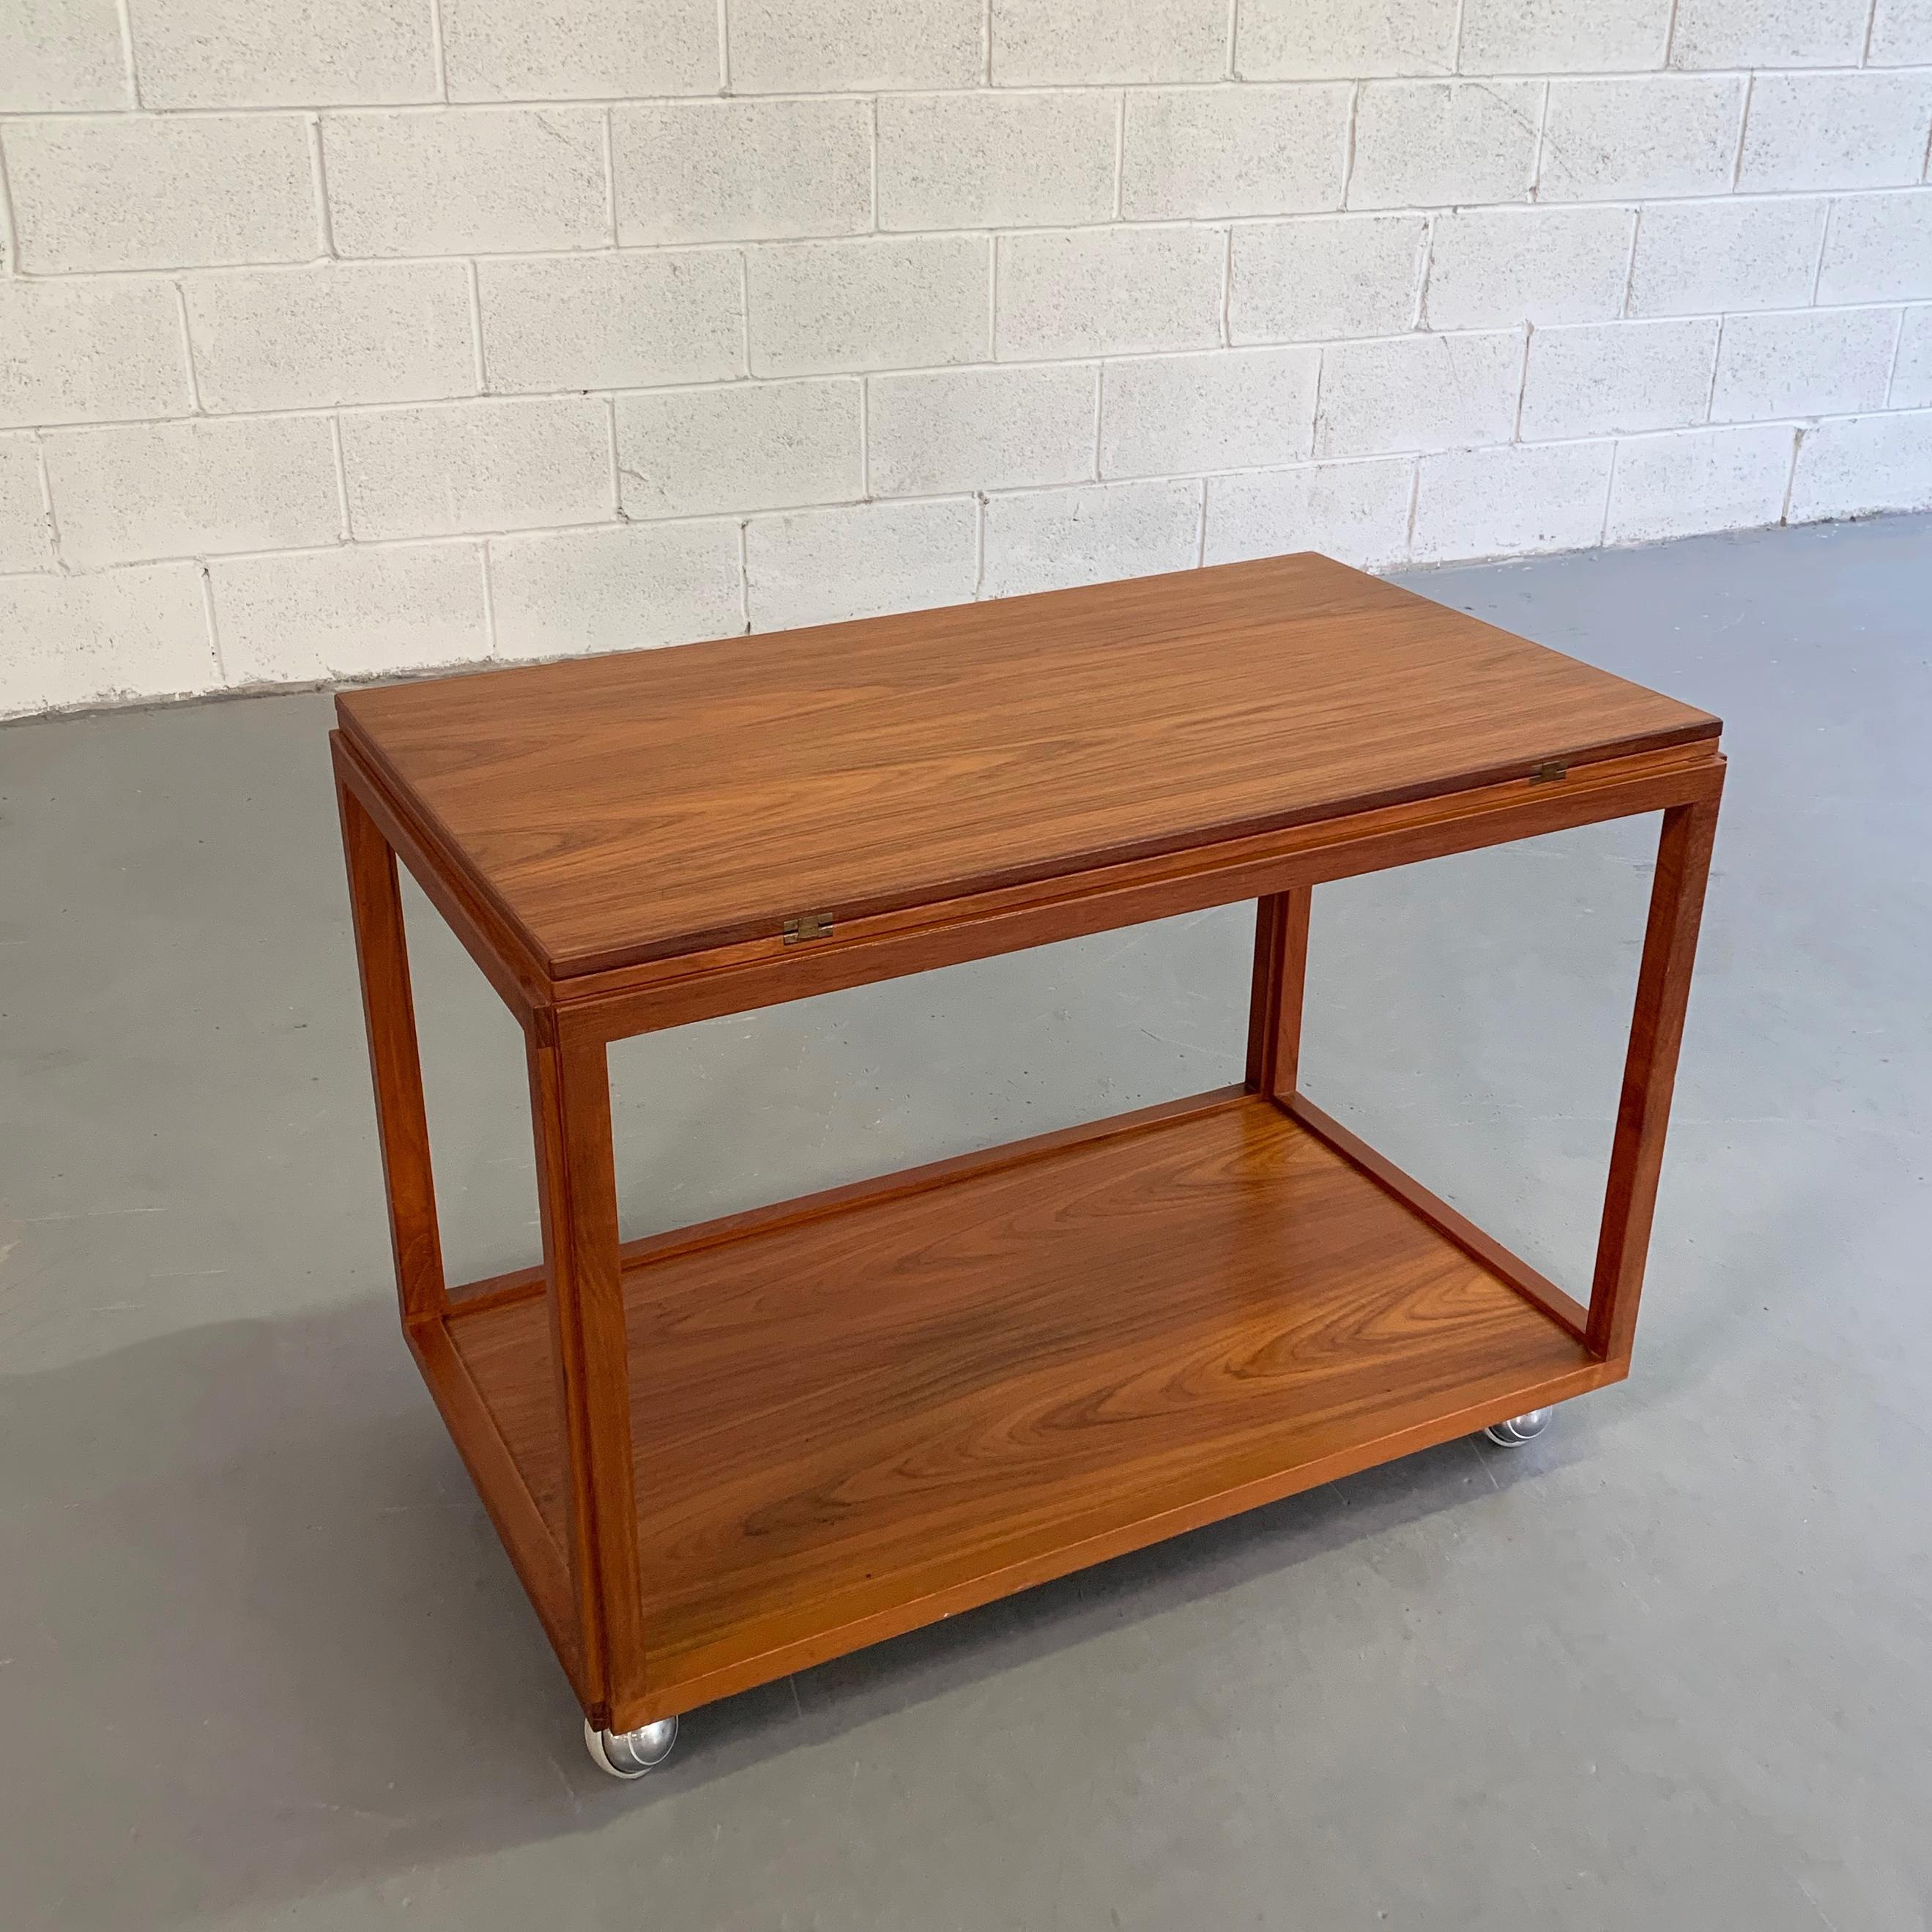 Multipurpose, Danish modern, rolling, teak side table or serving bar cart features an expanding top that swivels open to 38 x 32 inches with beautifully detailed joinery.